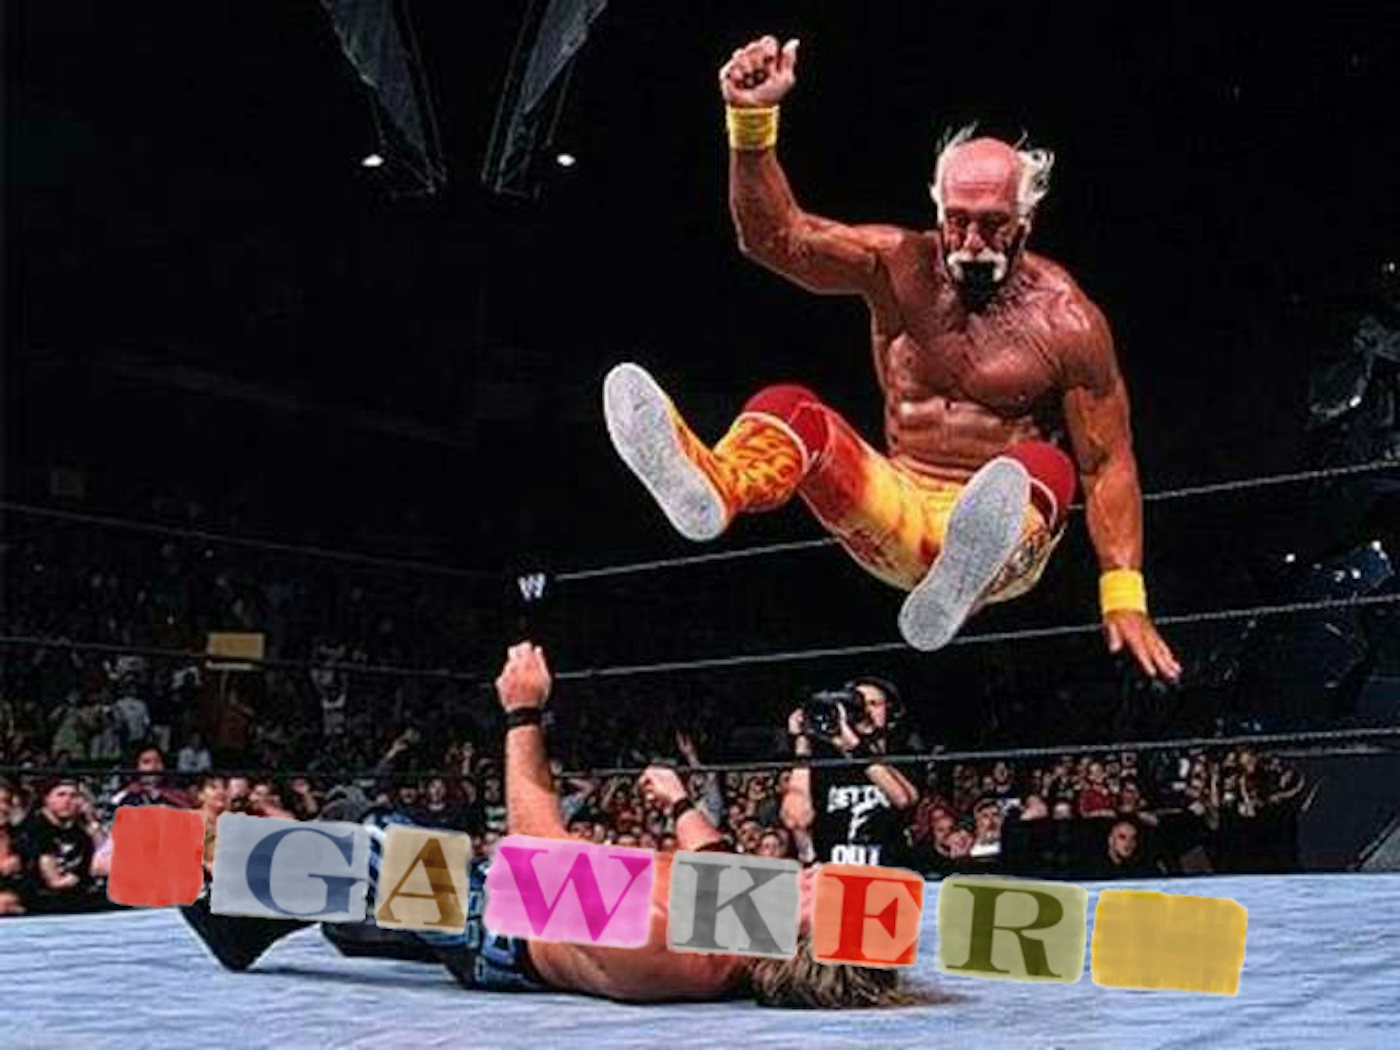 Gawker Braces For Hulk Hogan By Selling Off A Minority Stake To